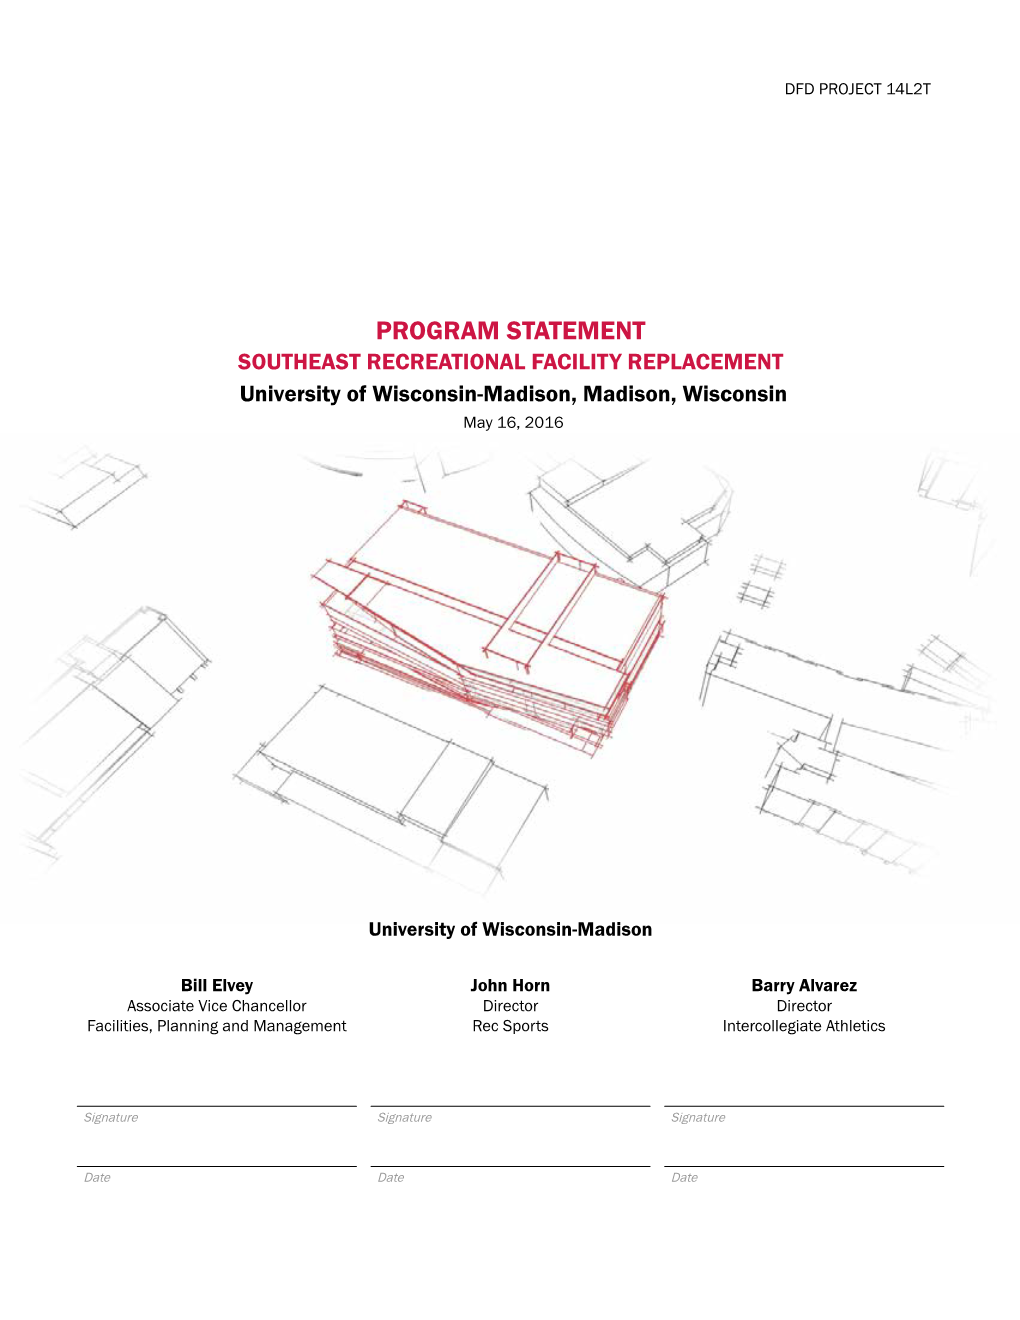 PROGRAM STATEMENT SOUTHEAST RECREATIONAL FACILITY REPLACEMENT University of Wisconsin-Madison, Madison, Wisconsin May 16, 2016